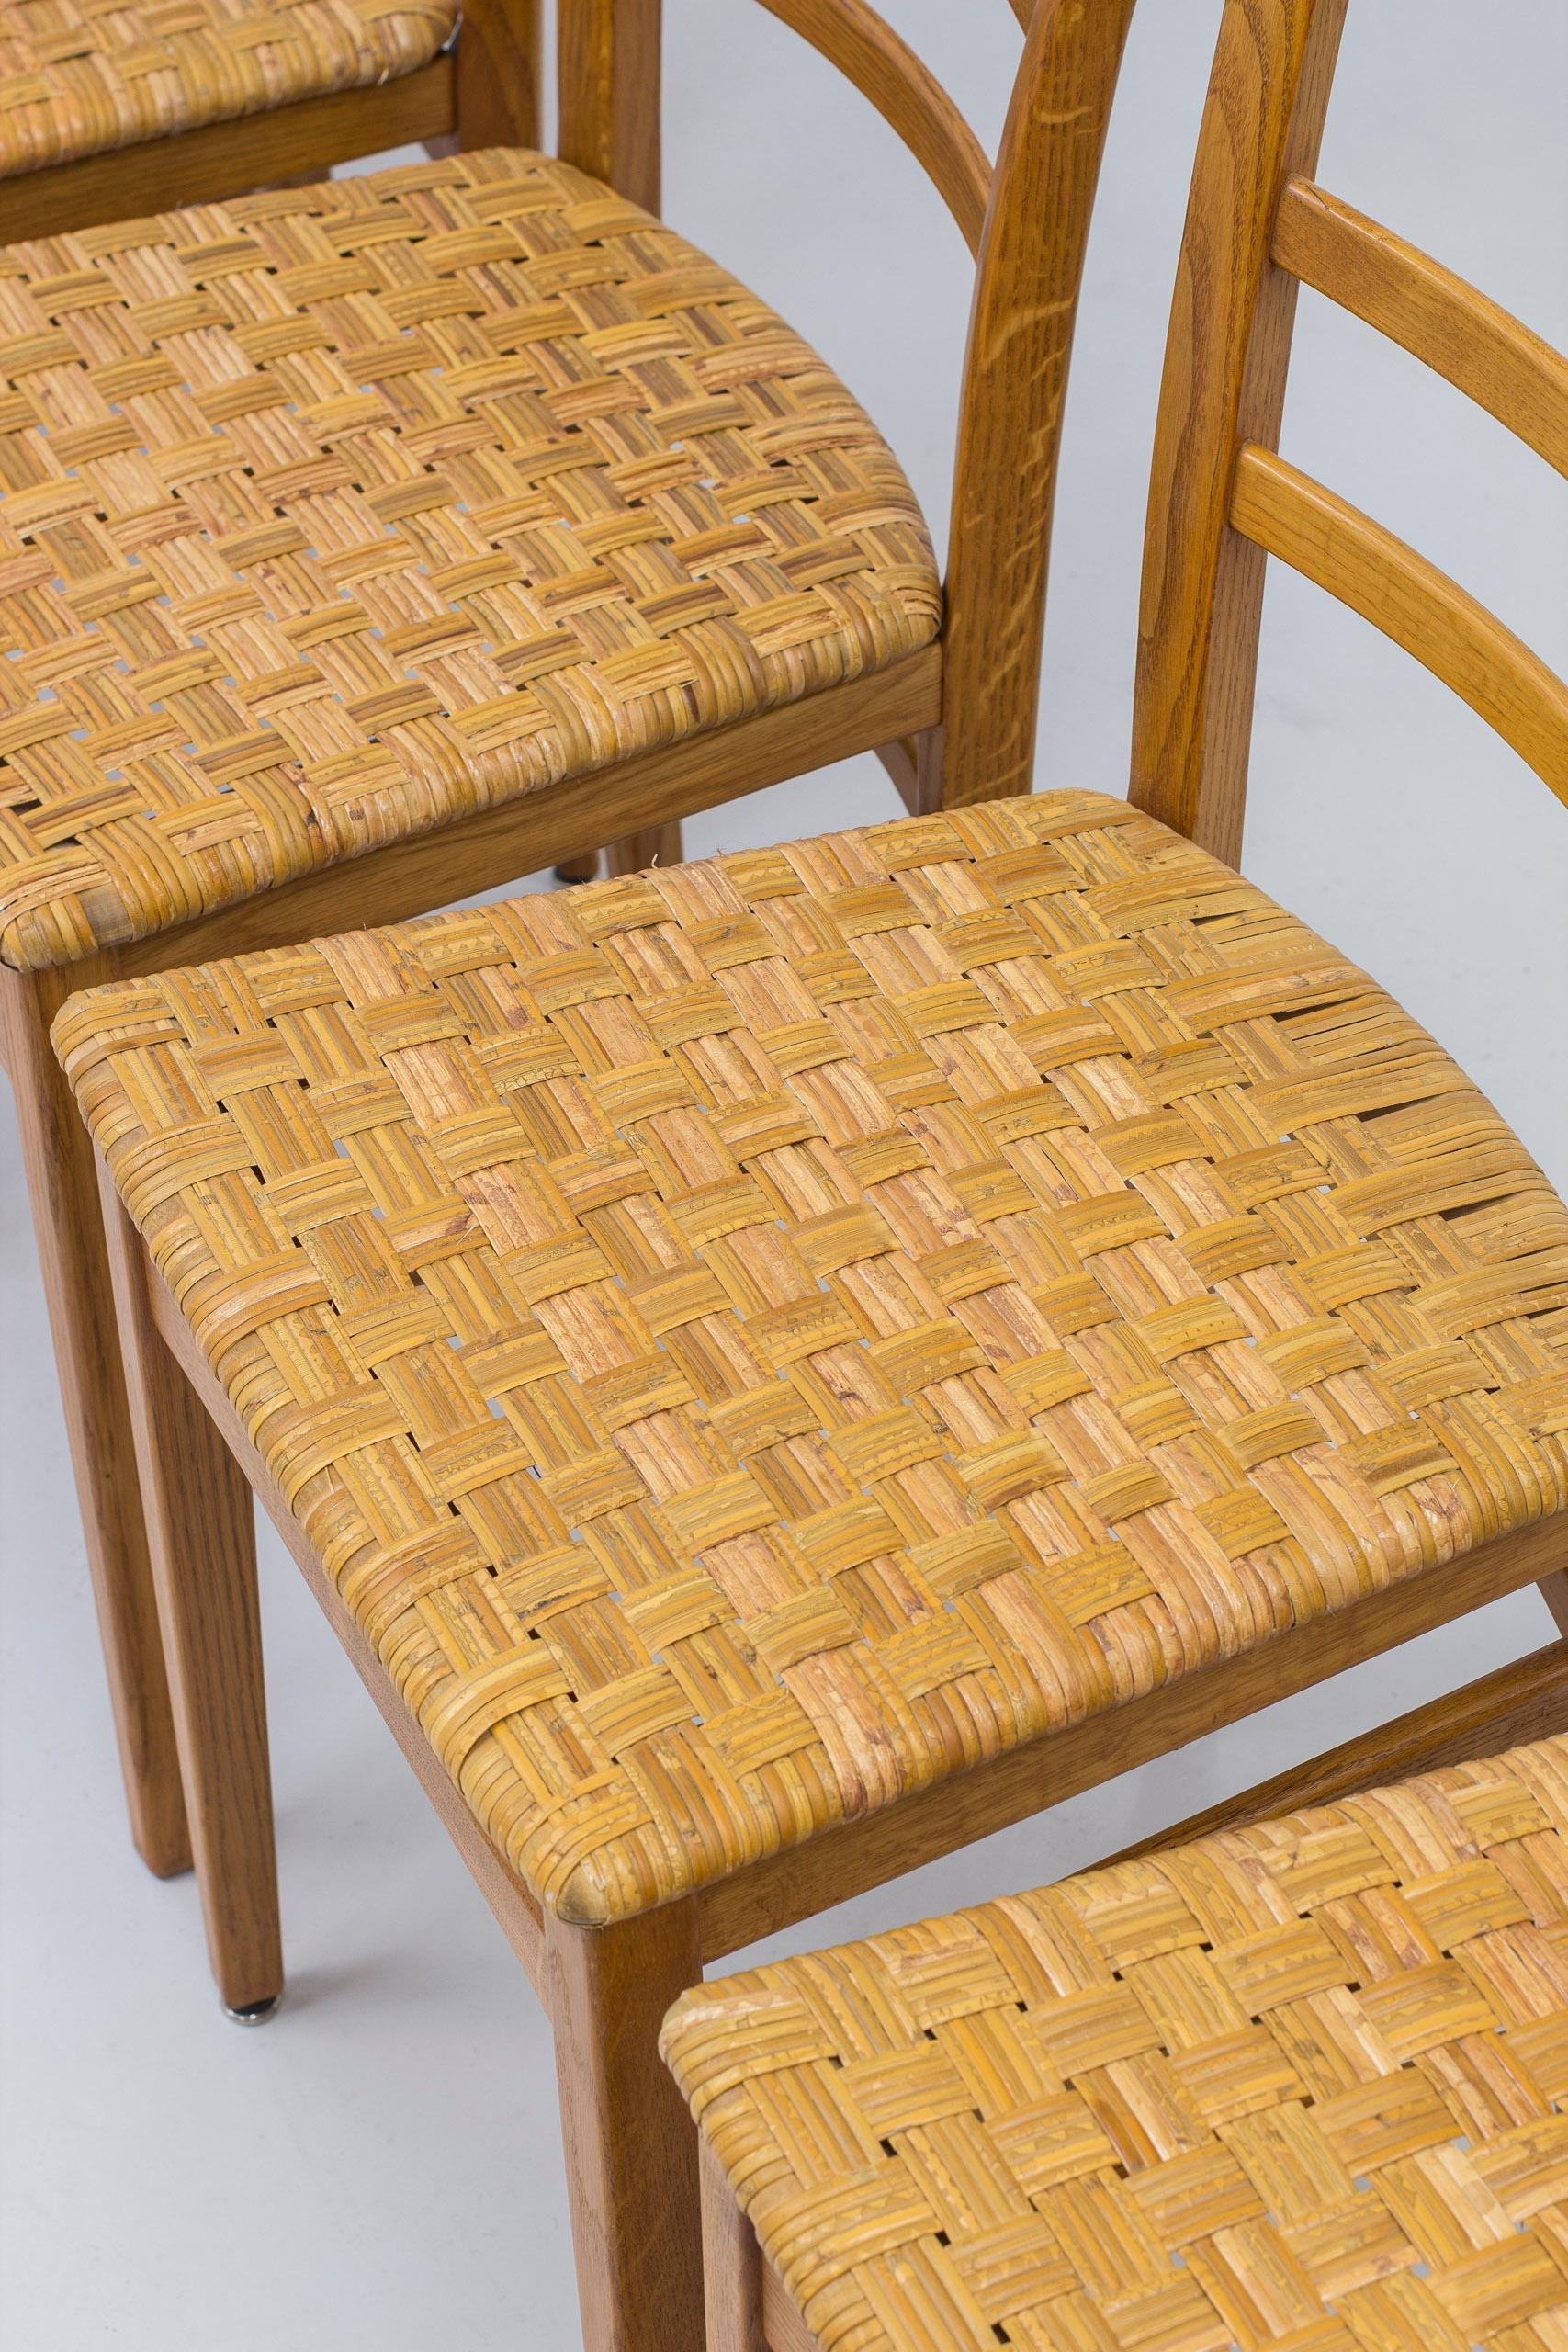 Oak and Cane Weave Dining Chairs by Carl Malmsten, Swedish Modern, 1950s For Sale 7